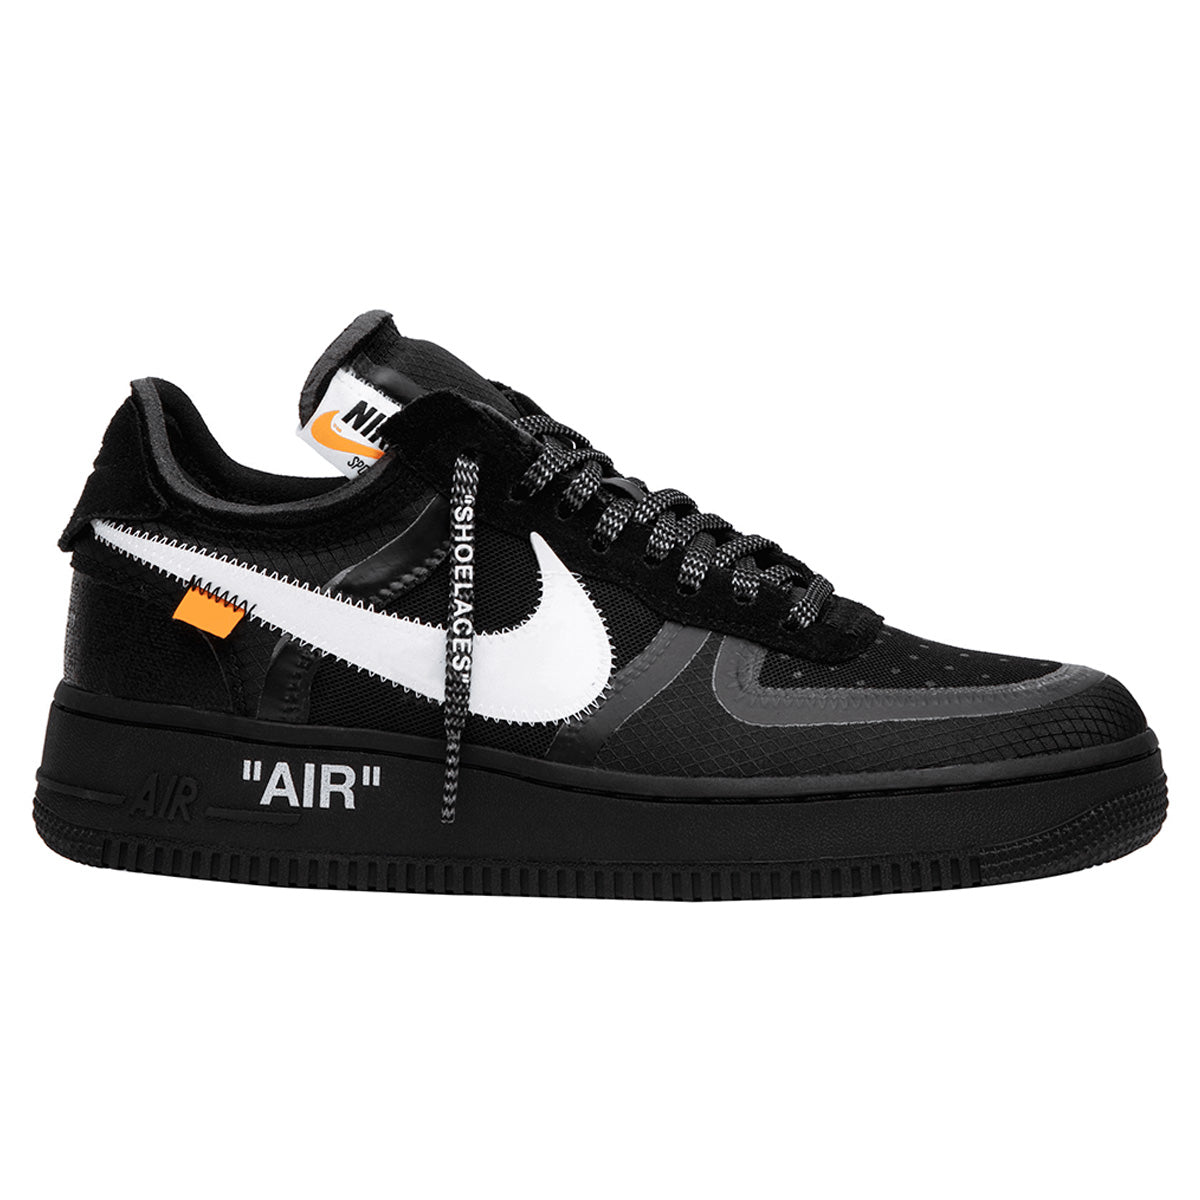 adidas air force 1, OFF 72%,Special offer!